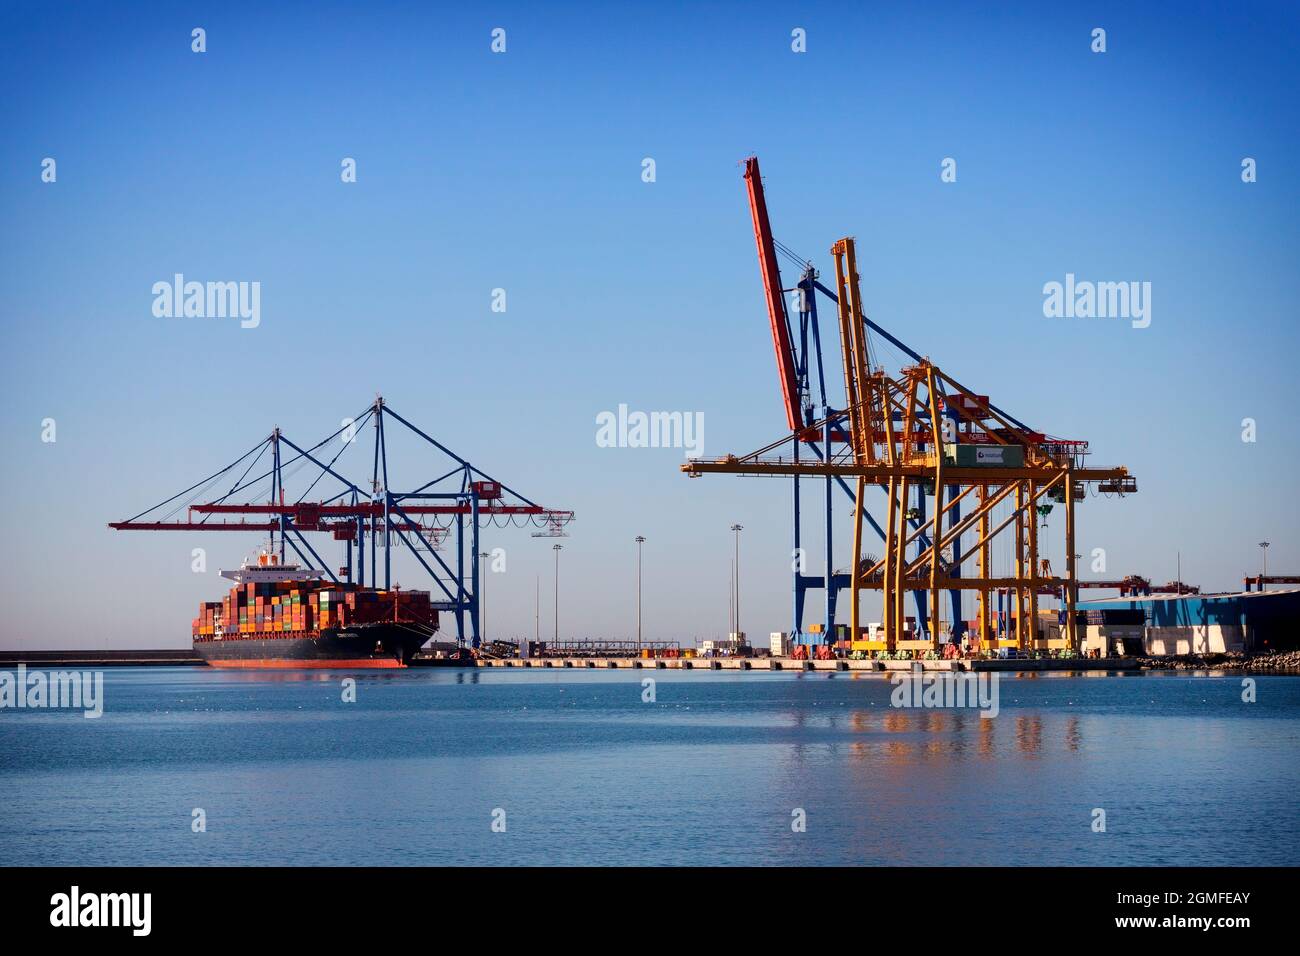 A container ship docked in the Andalucian port of Málaga, an international seaport that's the oldest  operating in Spain. Stock Photo